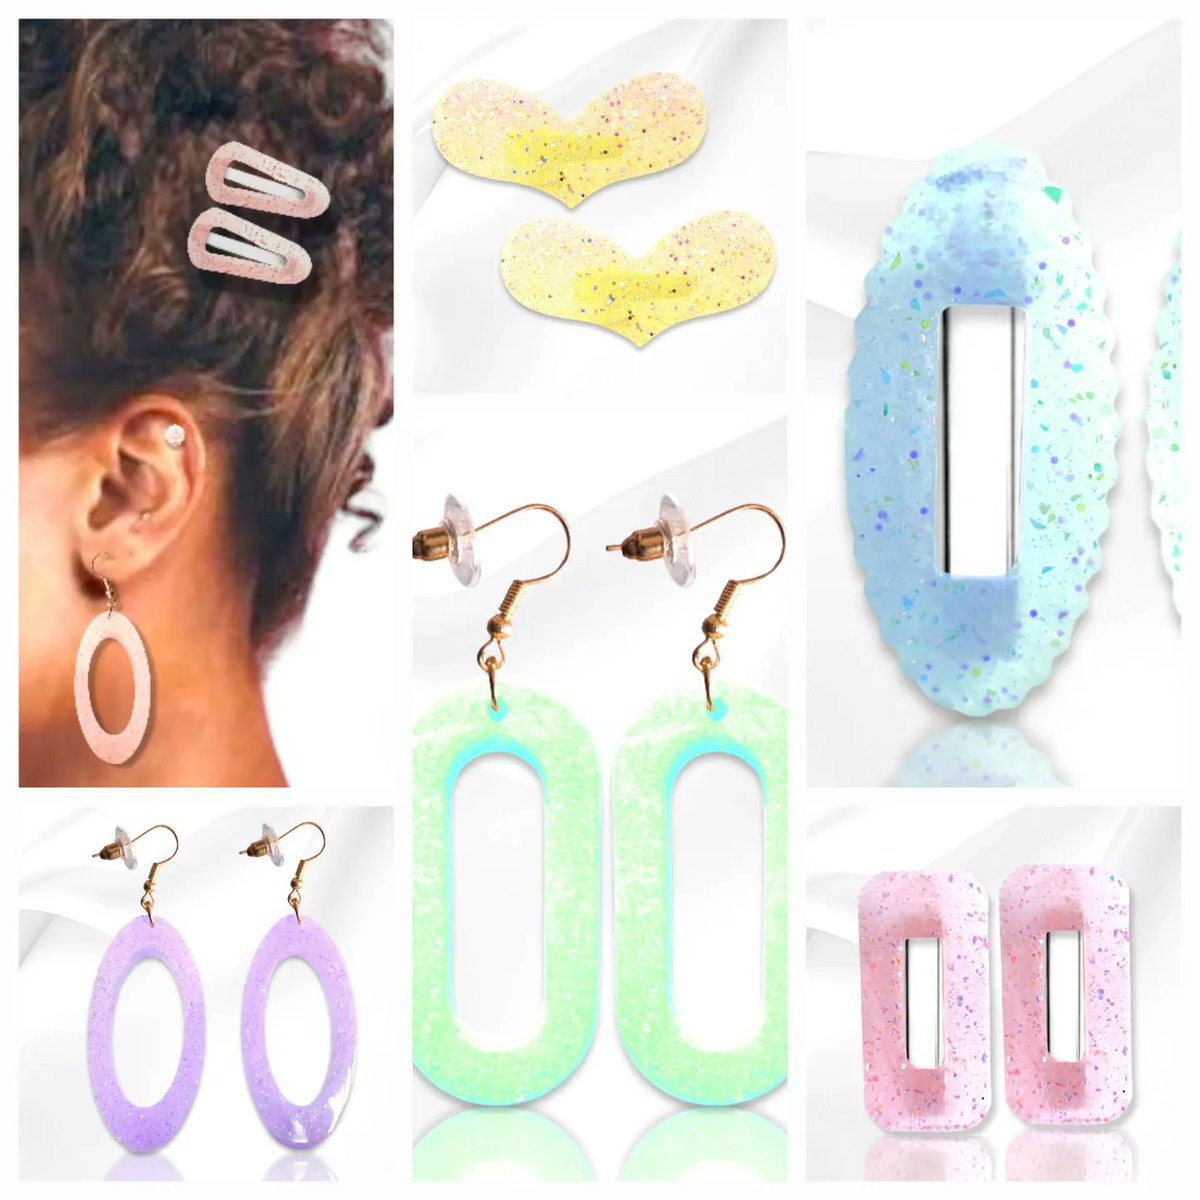 The Kimmo Kreations 'Pretty in Pastel' collection. For your more delicate and subtle style. . #kimmokreations #smallbusinessowner #scrunchiesareback #resinhairaccessory #resinhairclips #resinearrings #hairbowshandmade